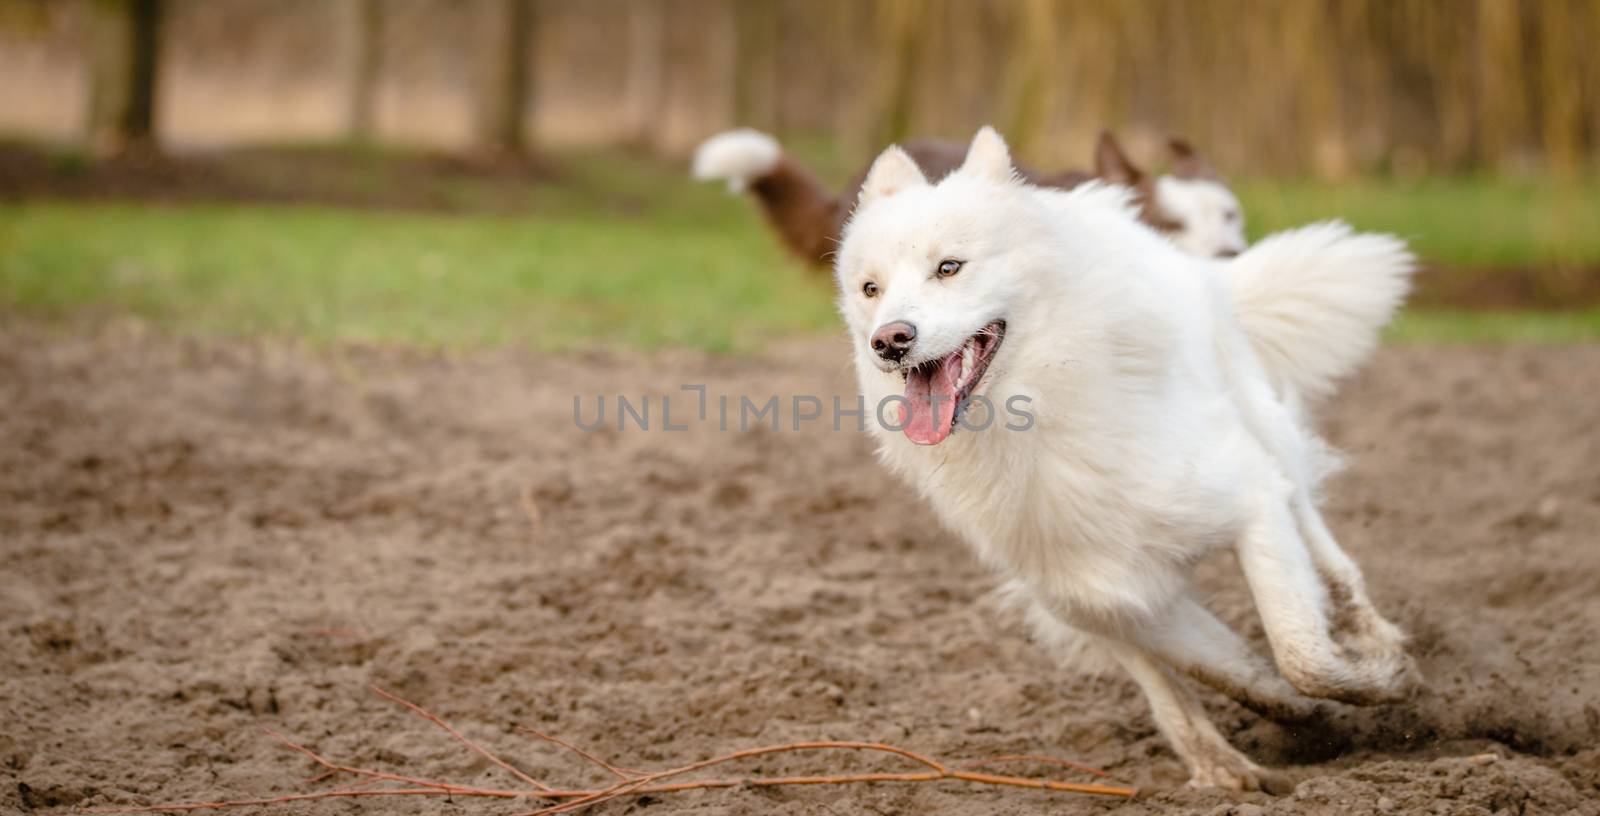 Cute, fluffy white Samoyed dog running and playing at the dog park